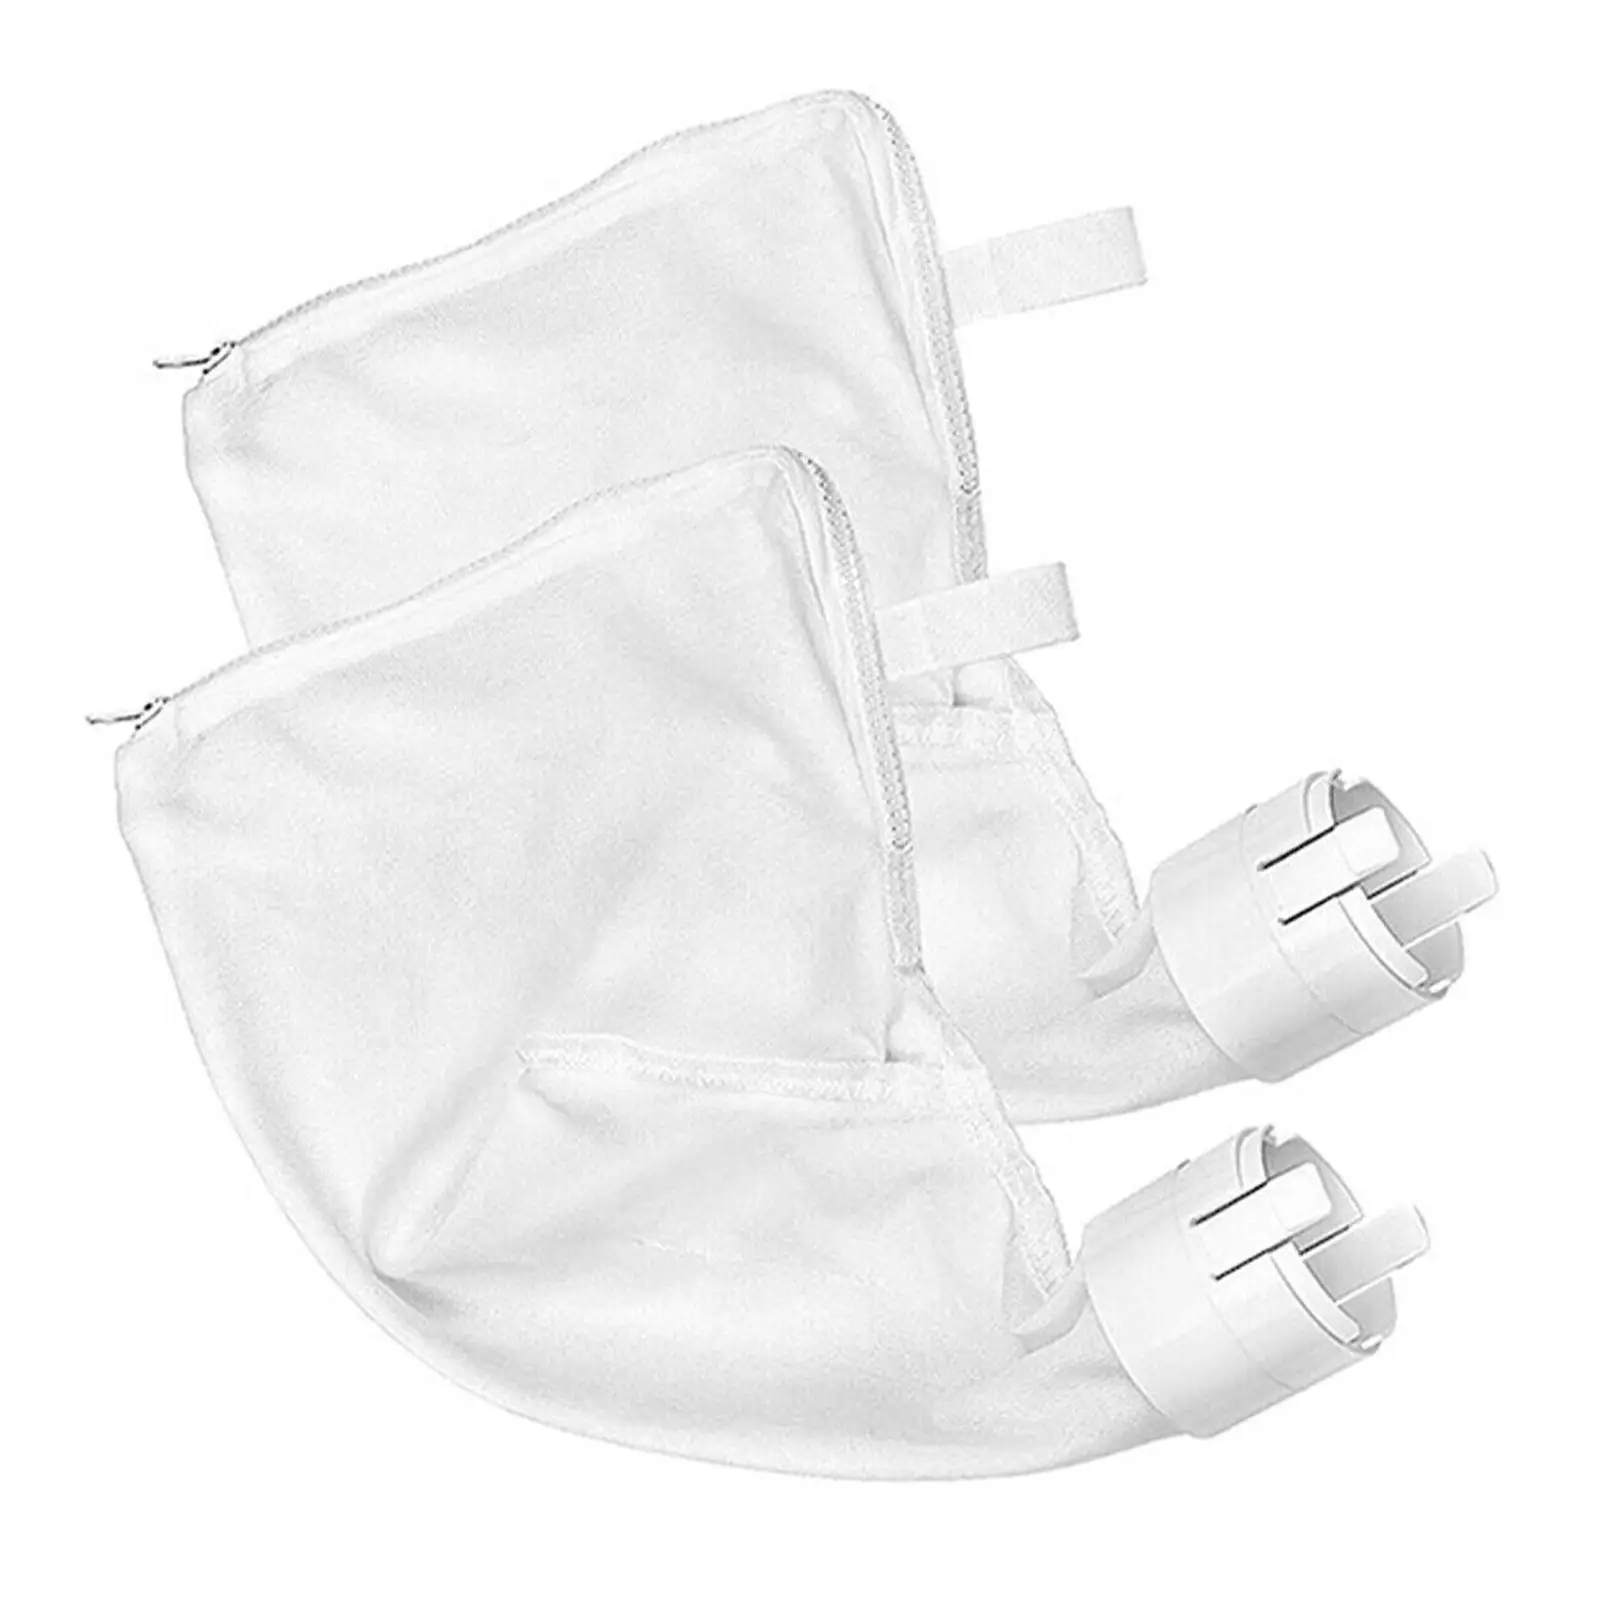 All Purpose Filter Bag Effective Cleaning Zippered Filter Bag Pool Cleaner Filter Bags for 360 Swimming Pool Cleaner Parts Accs